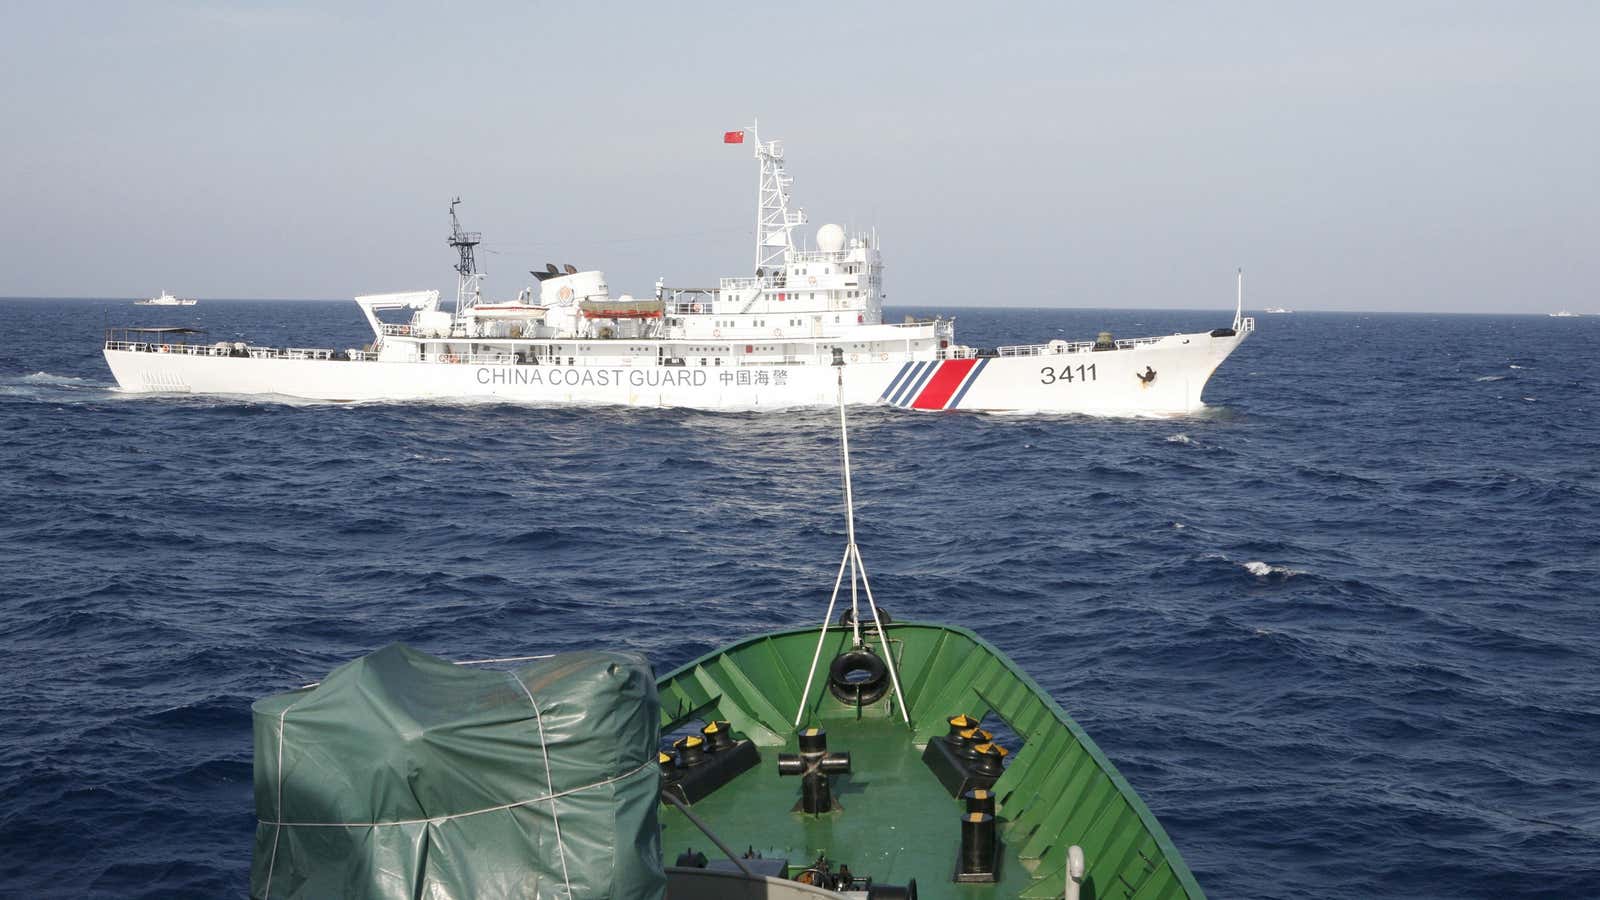 The Chinese Coast Guard is getting some extra help.